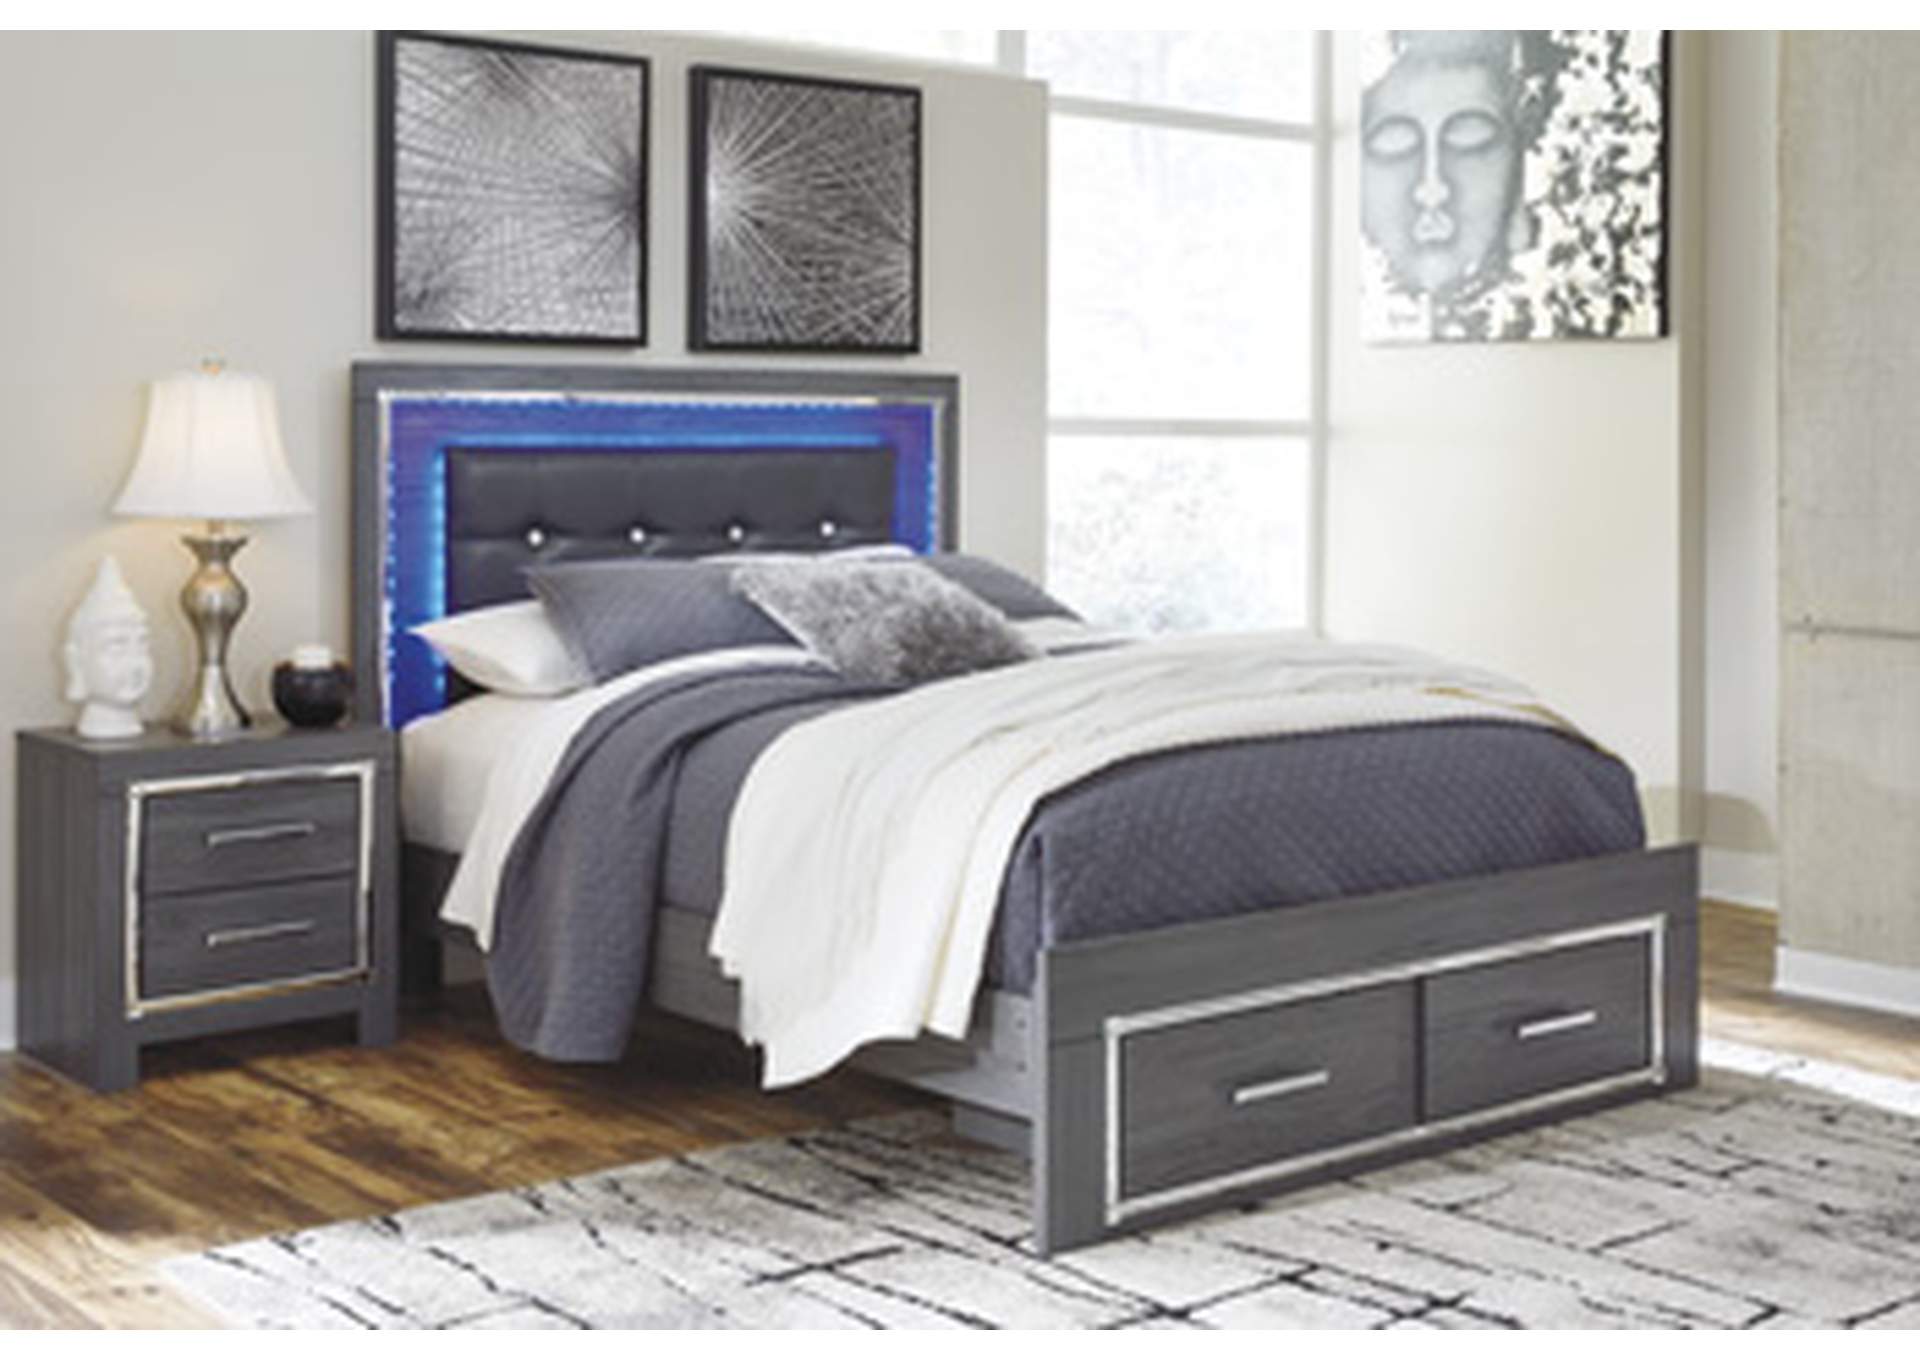 Lodanna King Upholstered Storage Bed, Dresser, Mirror, Chest, and Nightstand,Signature Design By Ashley